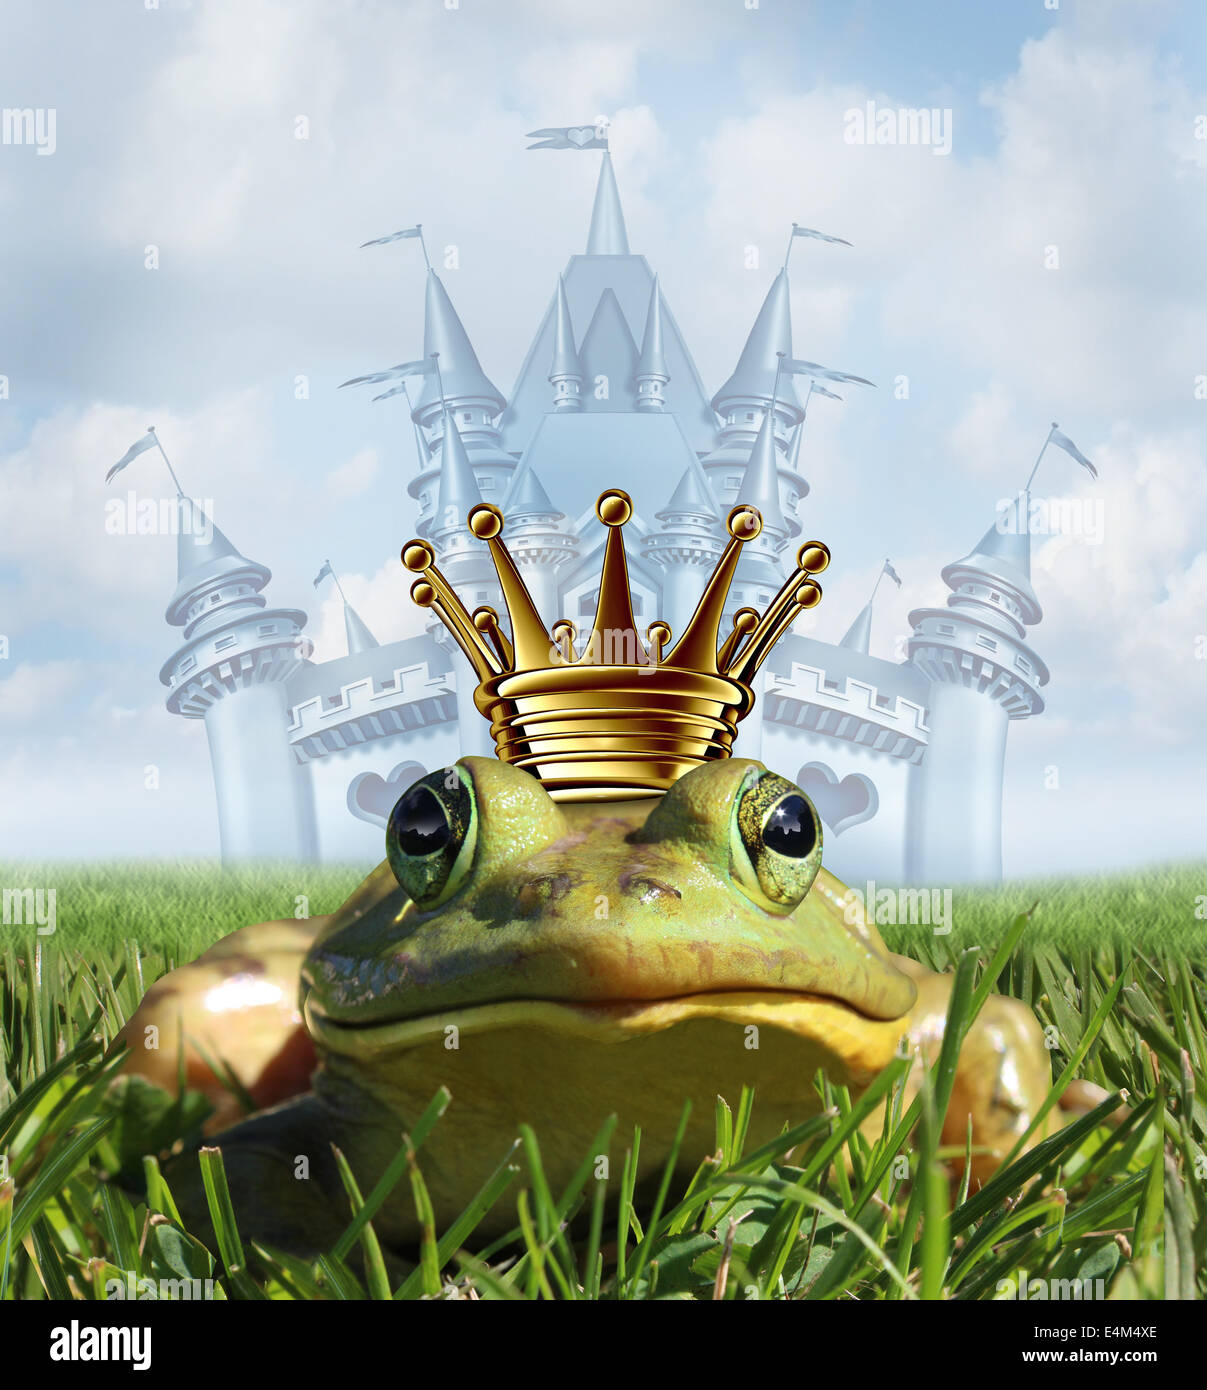 Frog prince castle concept with gold crown representing the fairy tale symbol of hope romance and change in a transformation from an amphibian to handsome royalty after a princess kiss. Stock Photo